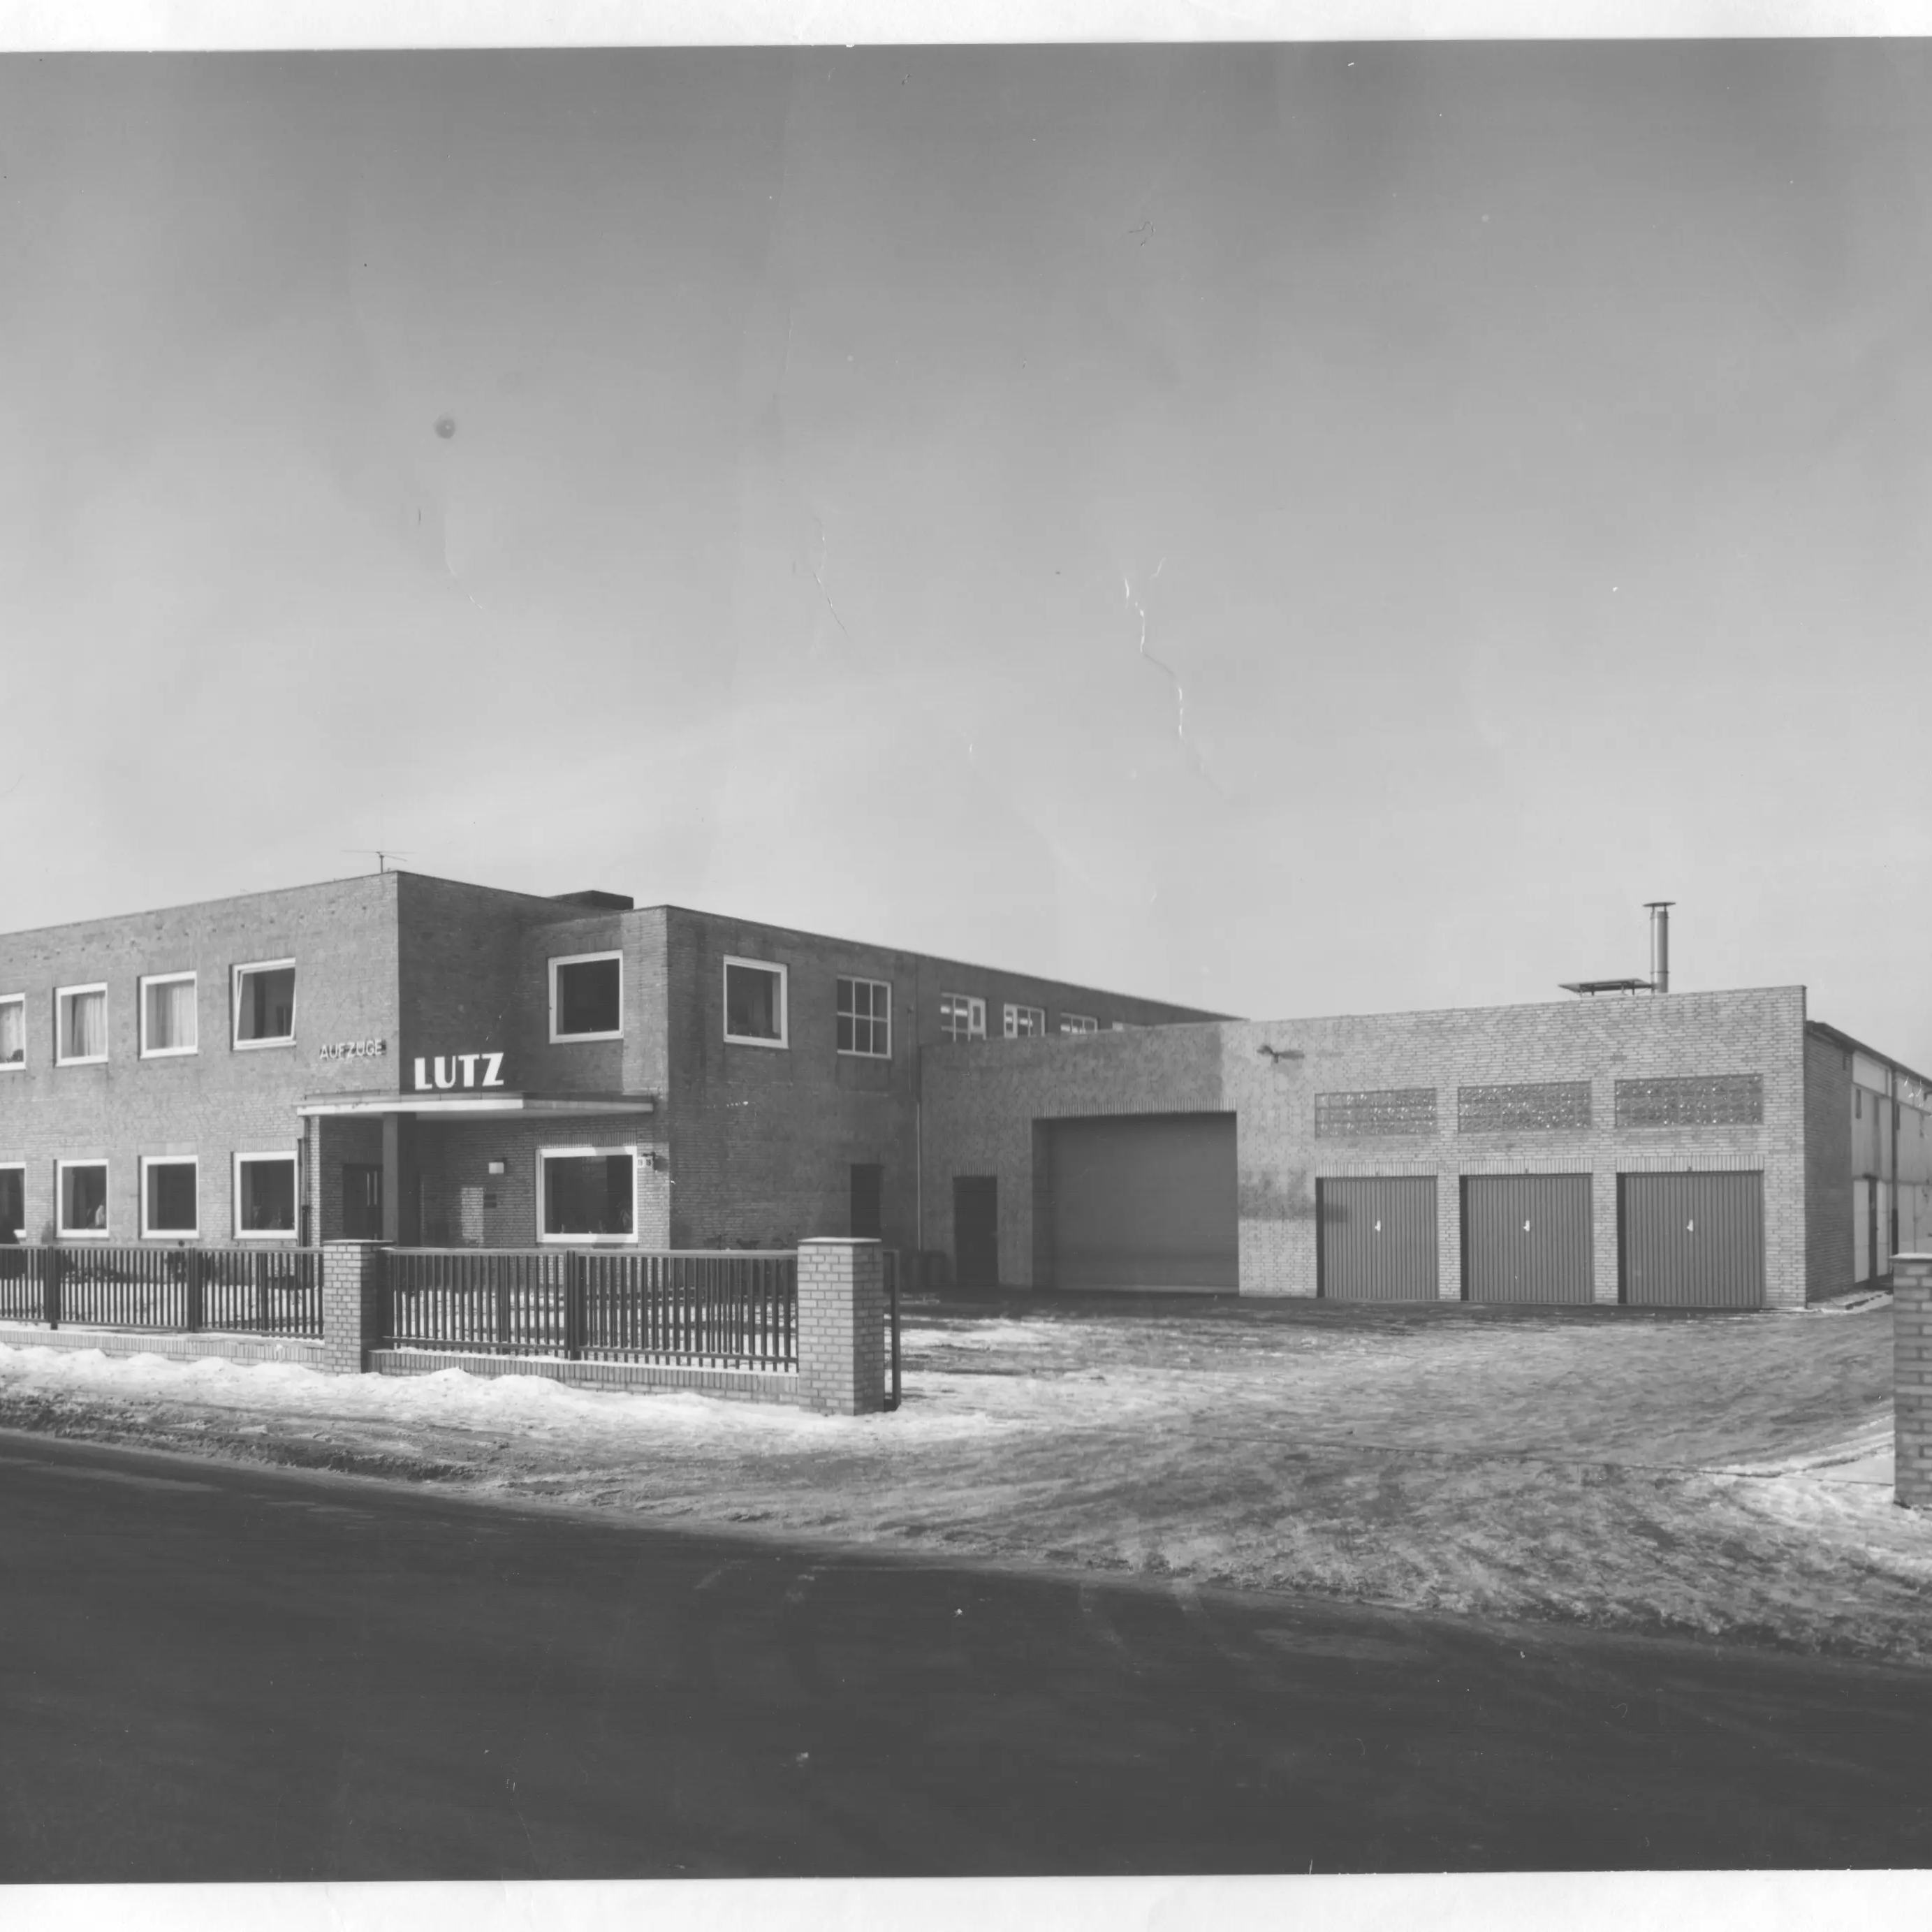 Historical perspective of our factory